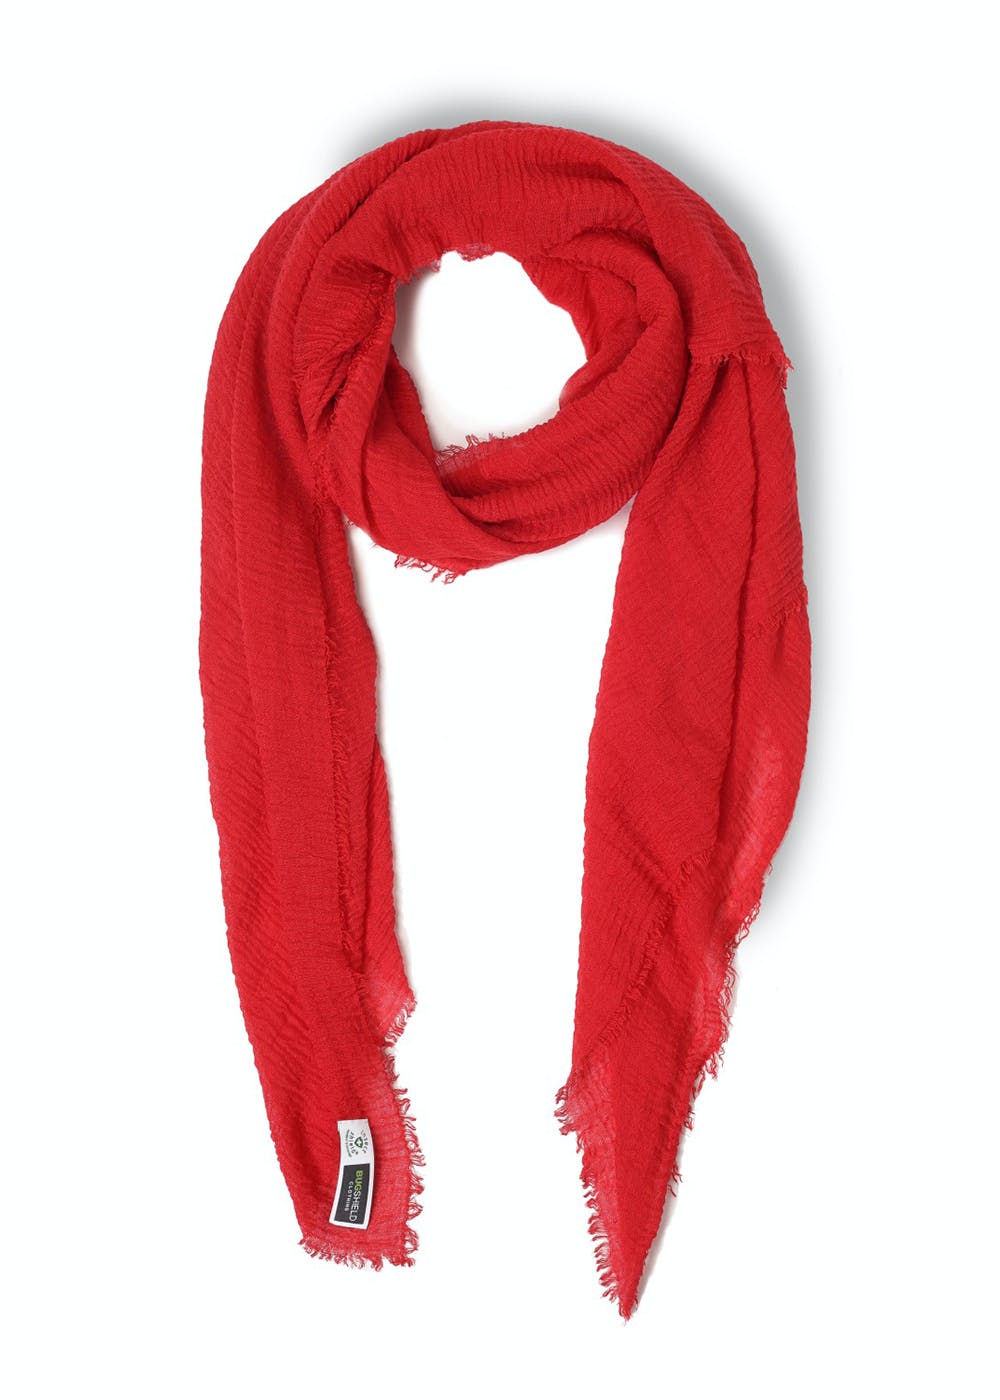 Lightweight Summer Mosquito repellent Cotton Wrap - Red